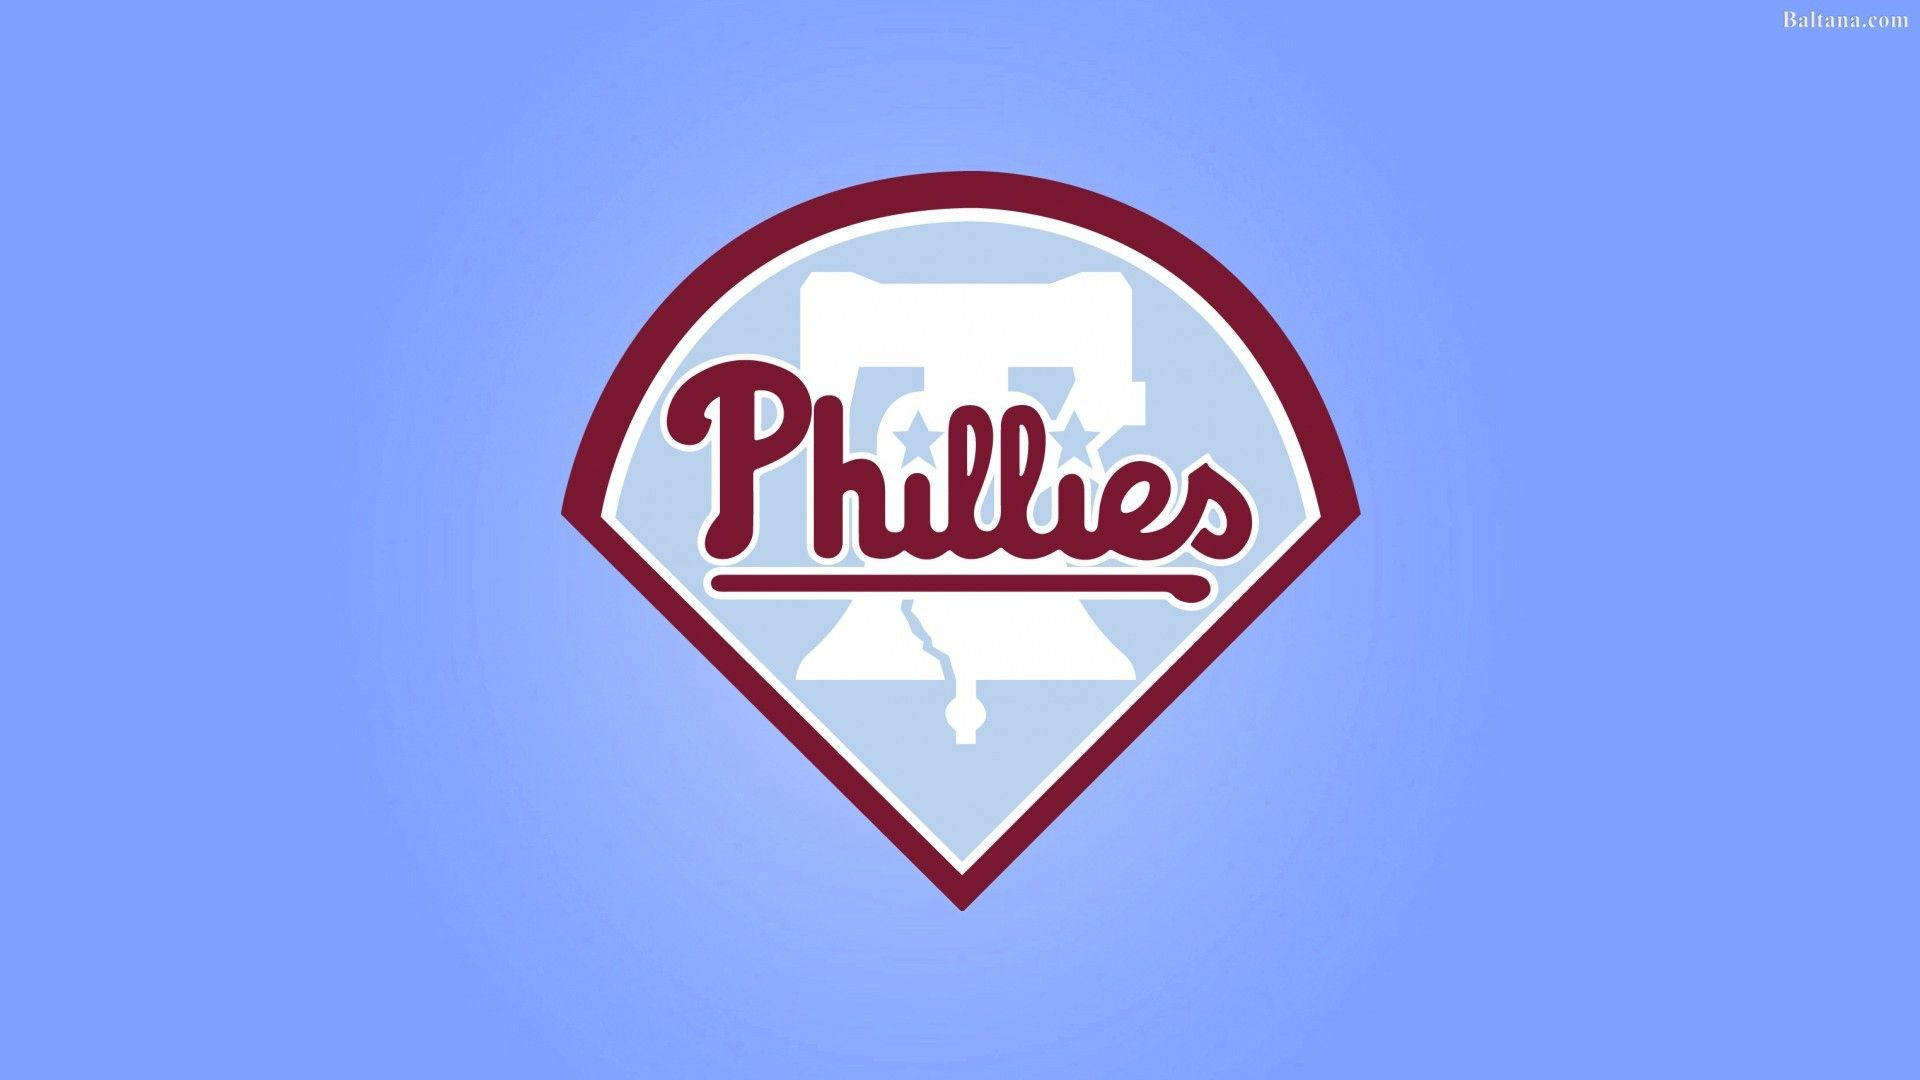 Heres a Phillies wallpaper I made if any are interested  rphillies